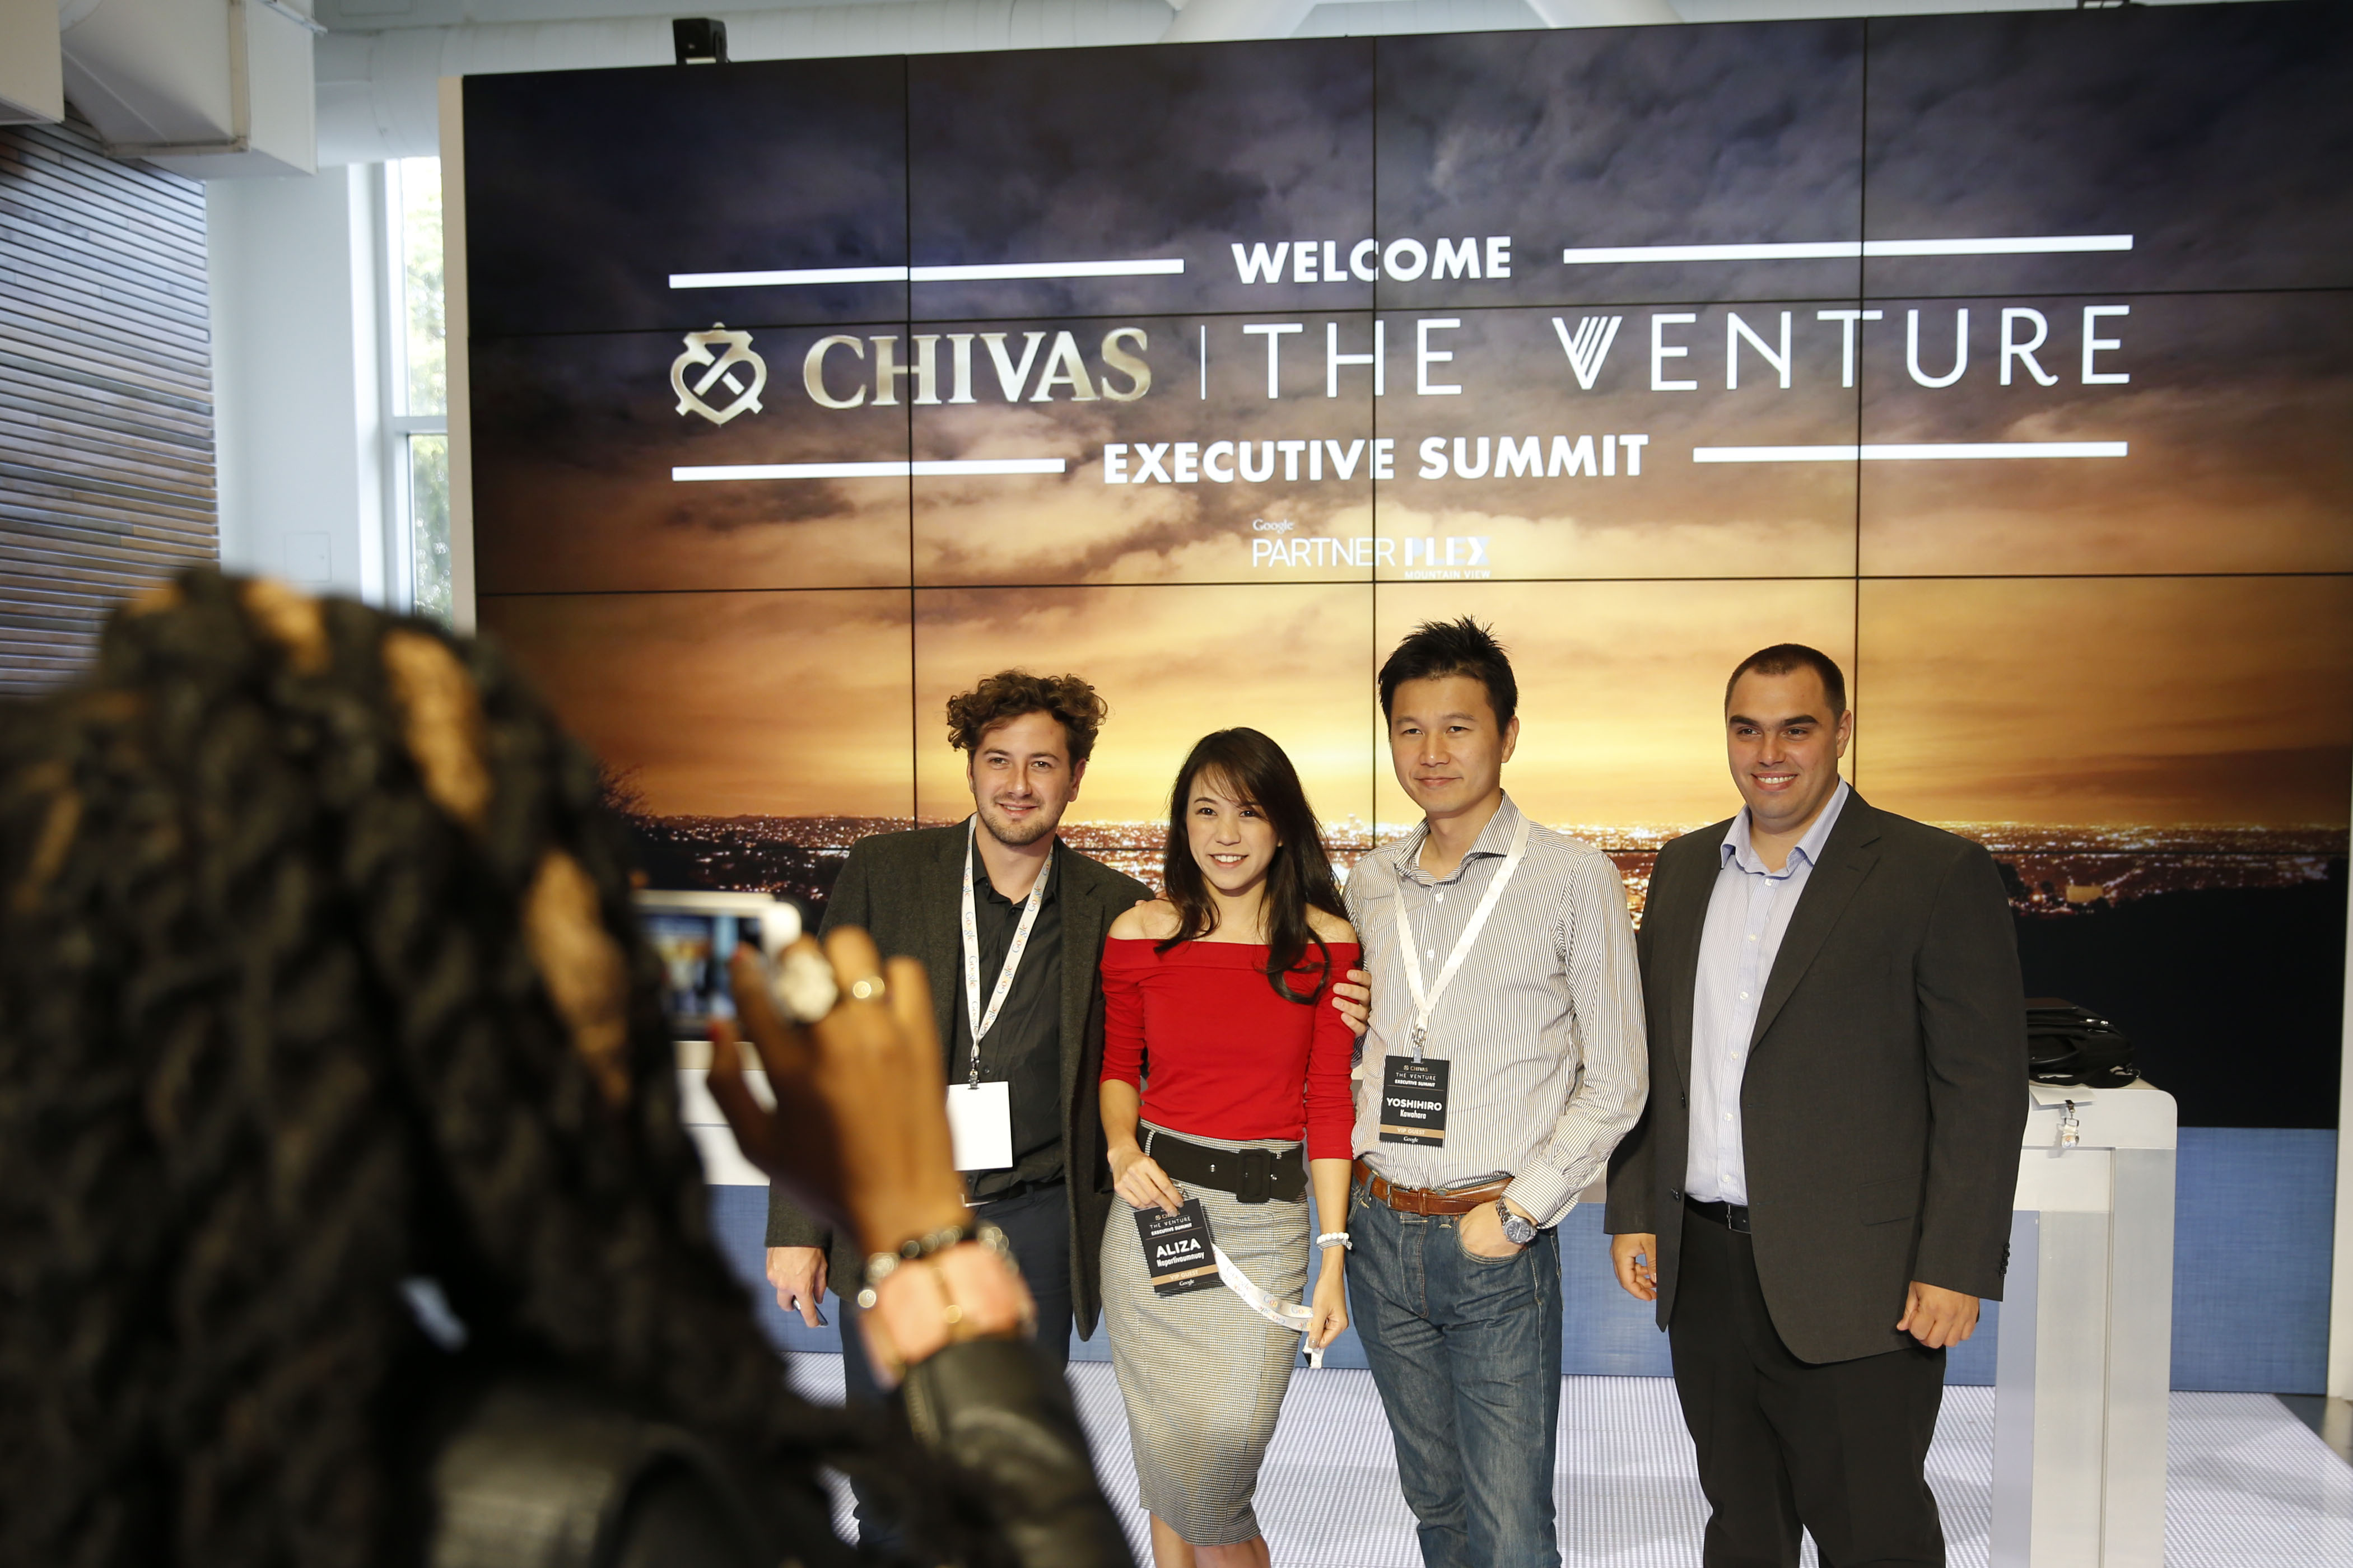 Chivas Regal brings $1 million The Venture competition to Nigeria, calls for application from social entrepreneurs